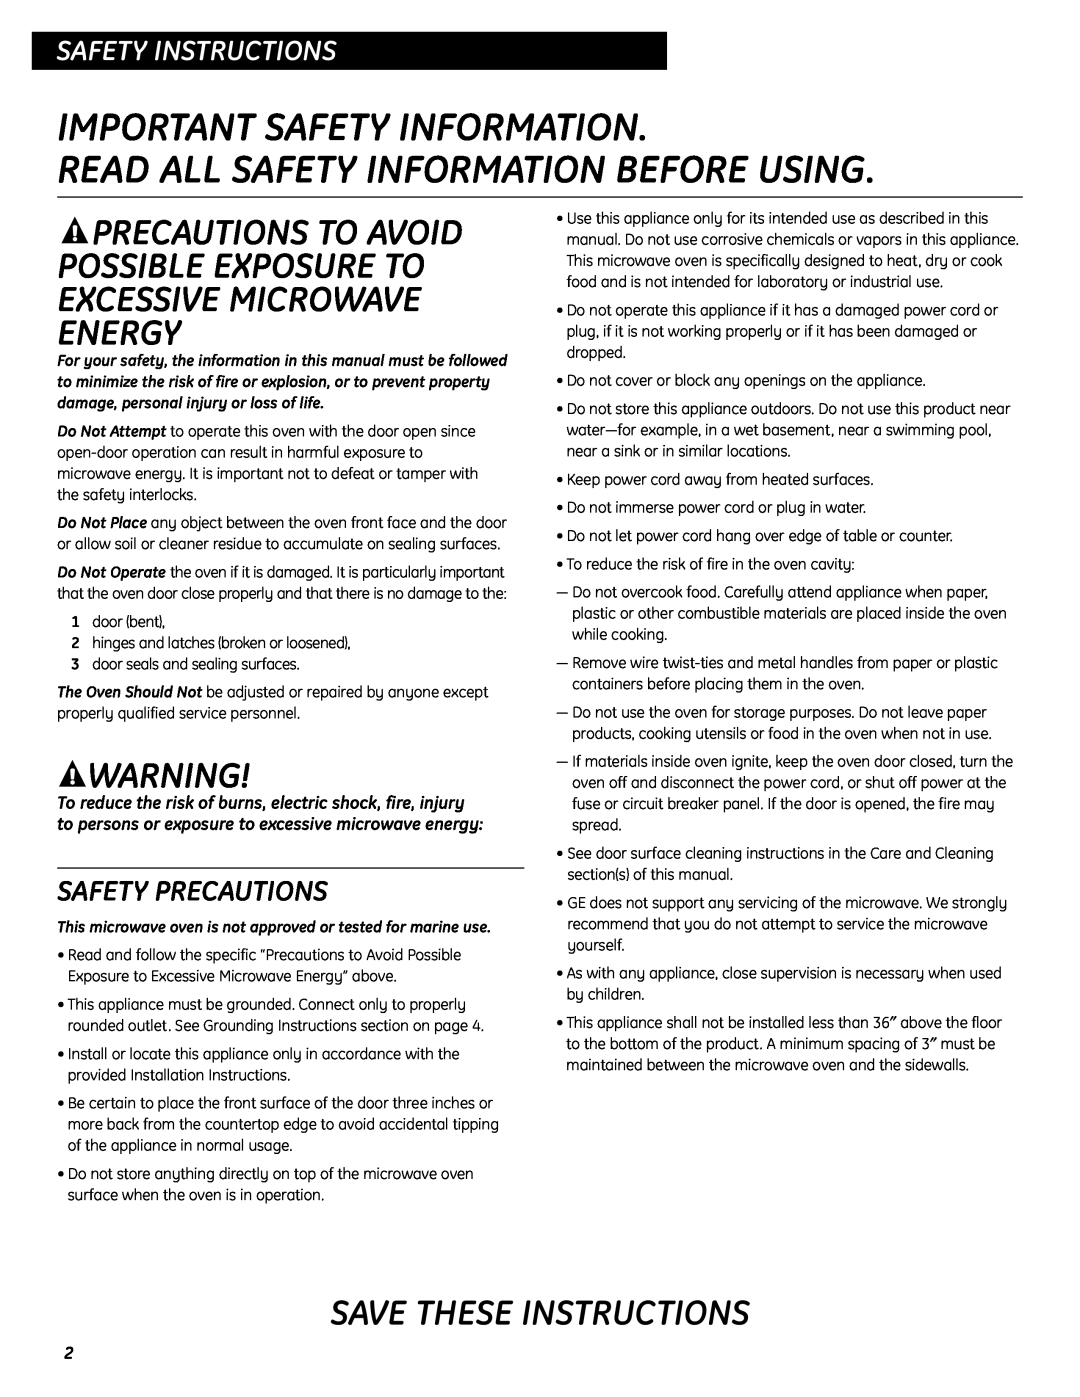 GE SESO732 quick start Important Safety Information Read All Safety Information Before Using, Save These Instructions 